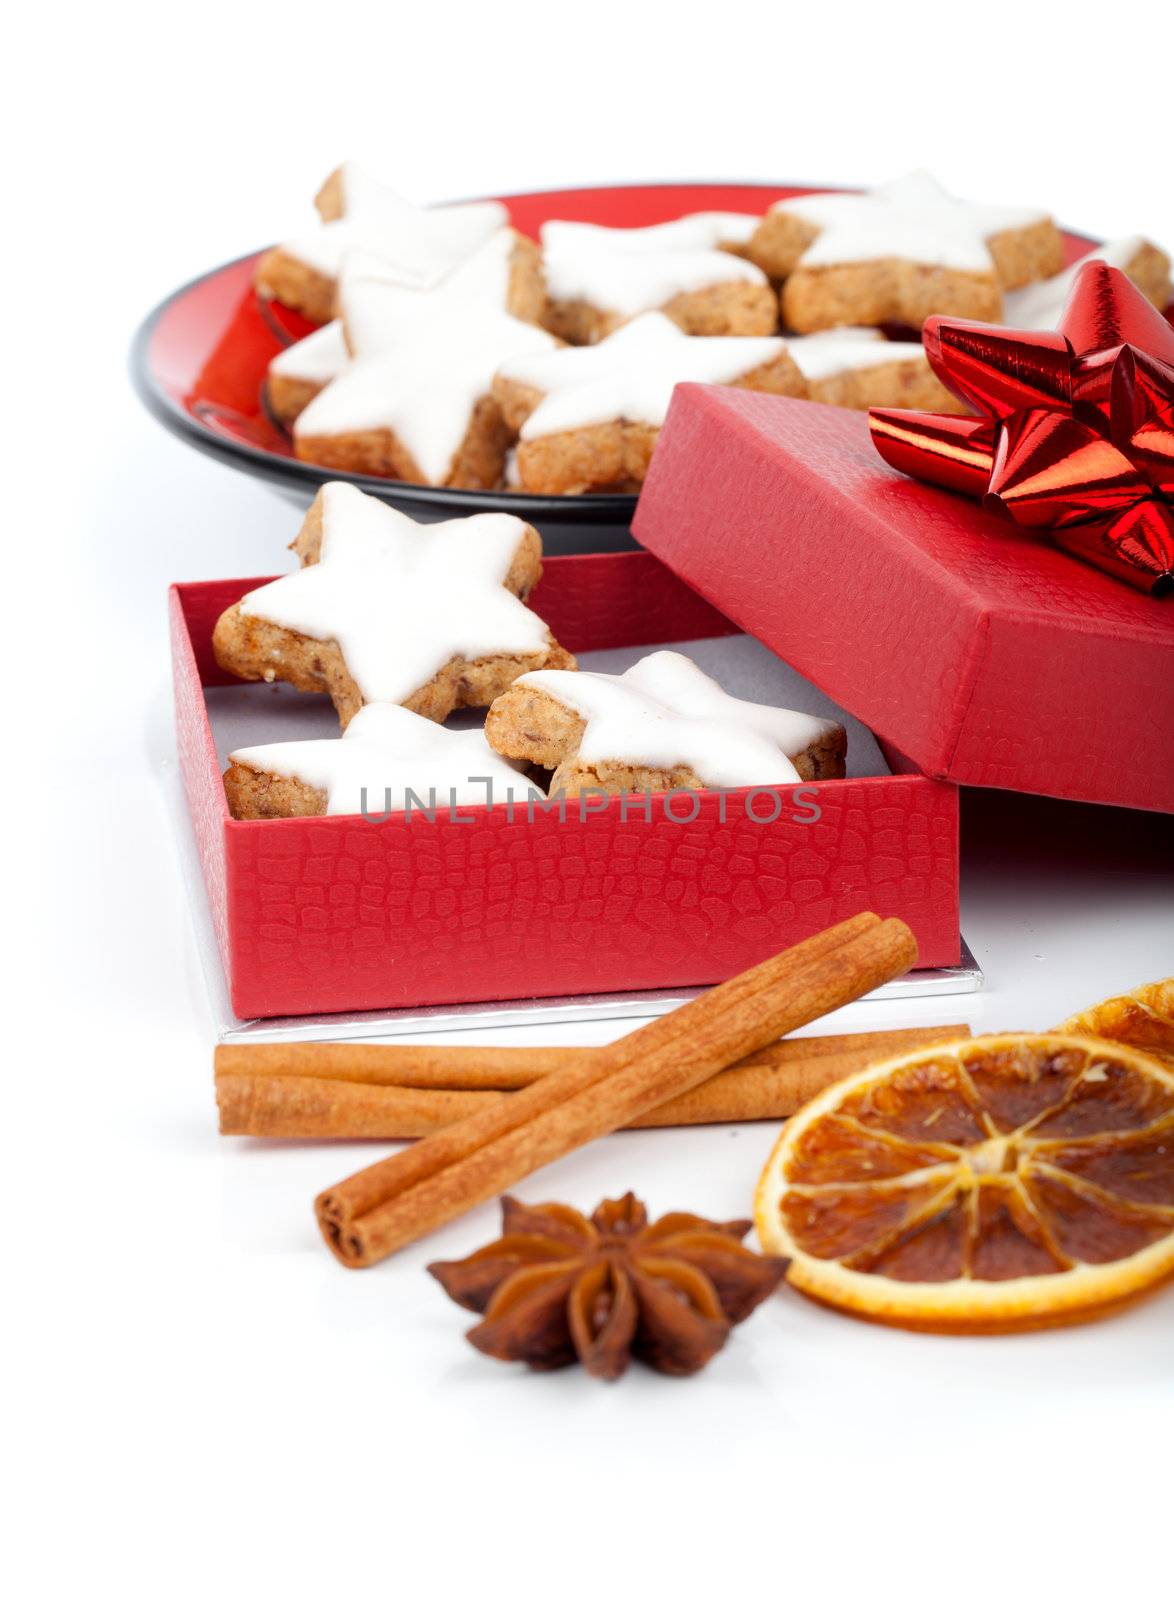 star shaped cinnamon biscuit in red box with Anise, cinnamon and orange on white background